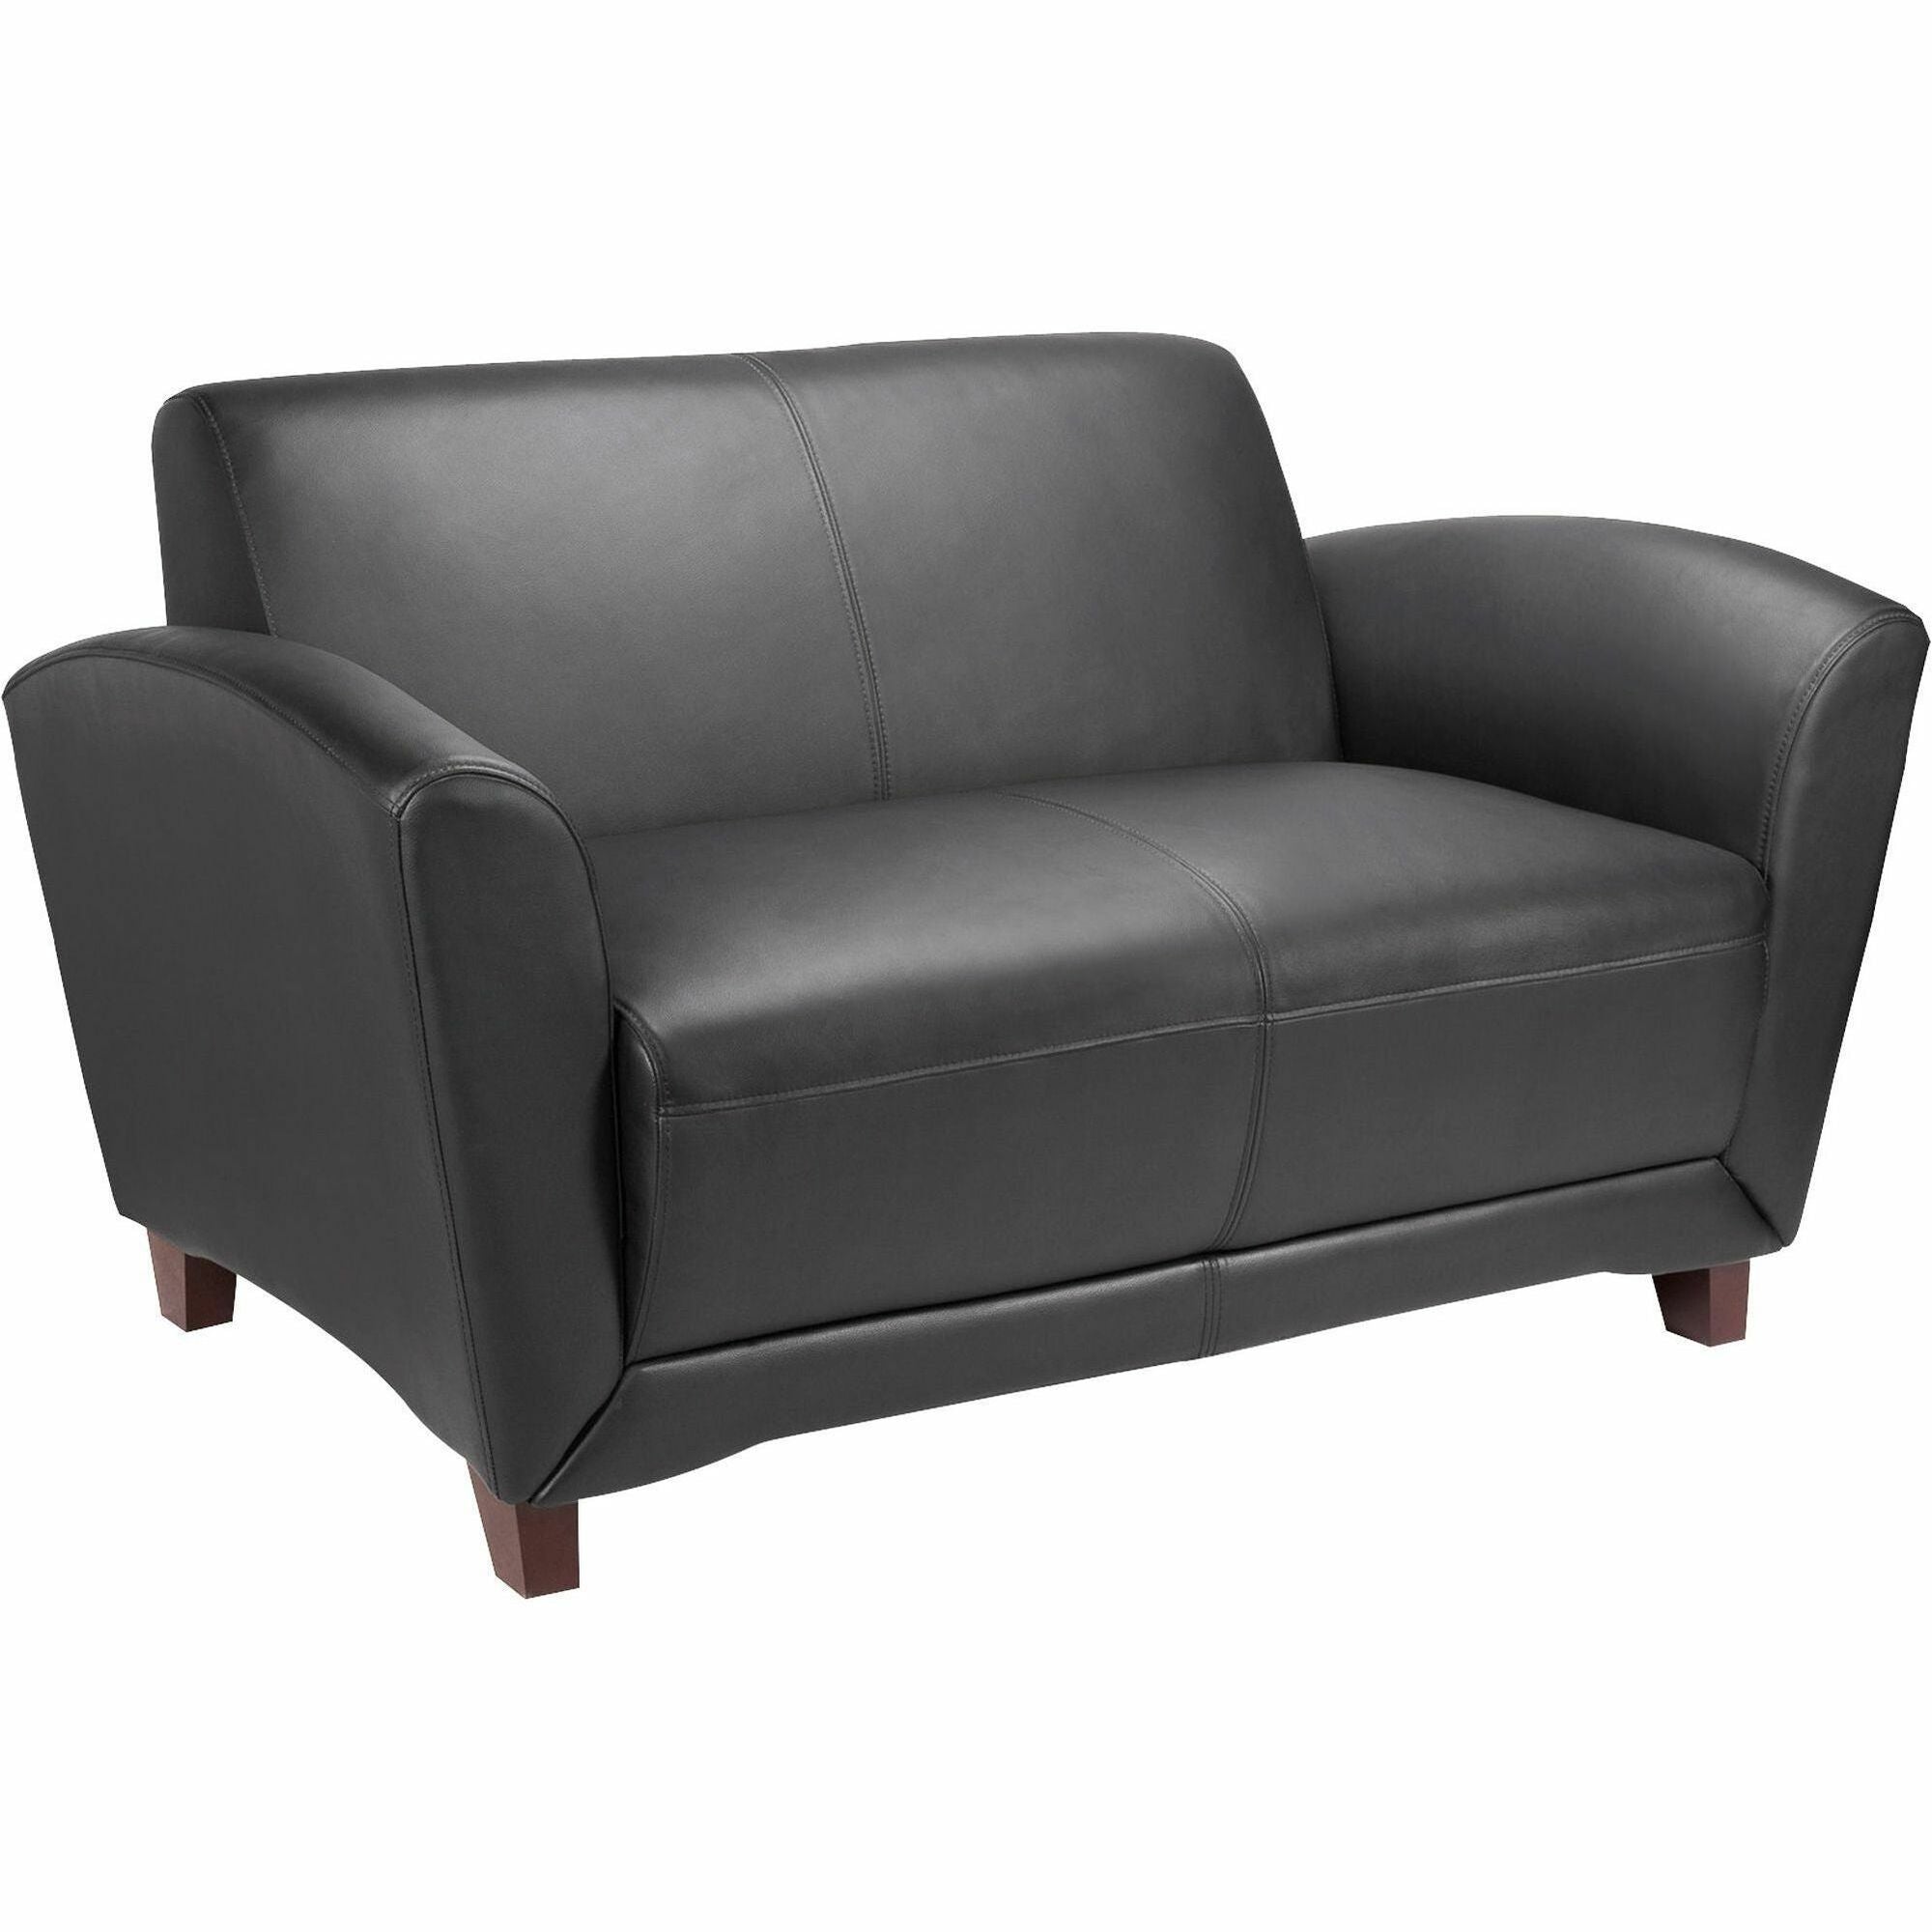 Lorell Accession Reception Loveseat - 55" x 34.5" x 31.3" - Leather Black Seat - Leather Black Back - 1 Each - 